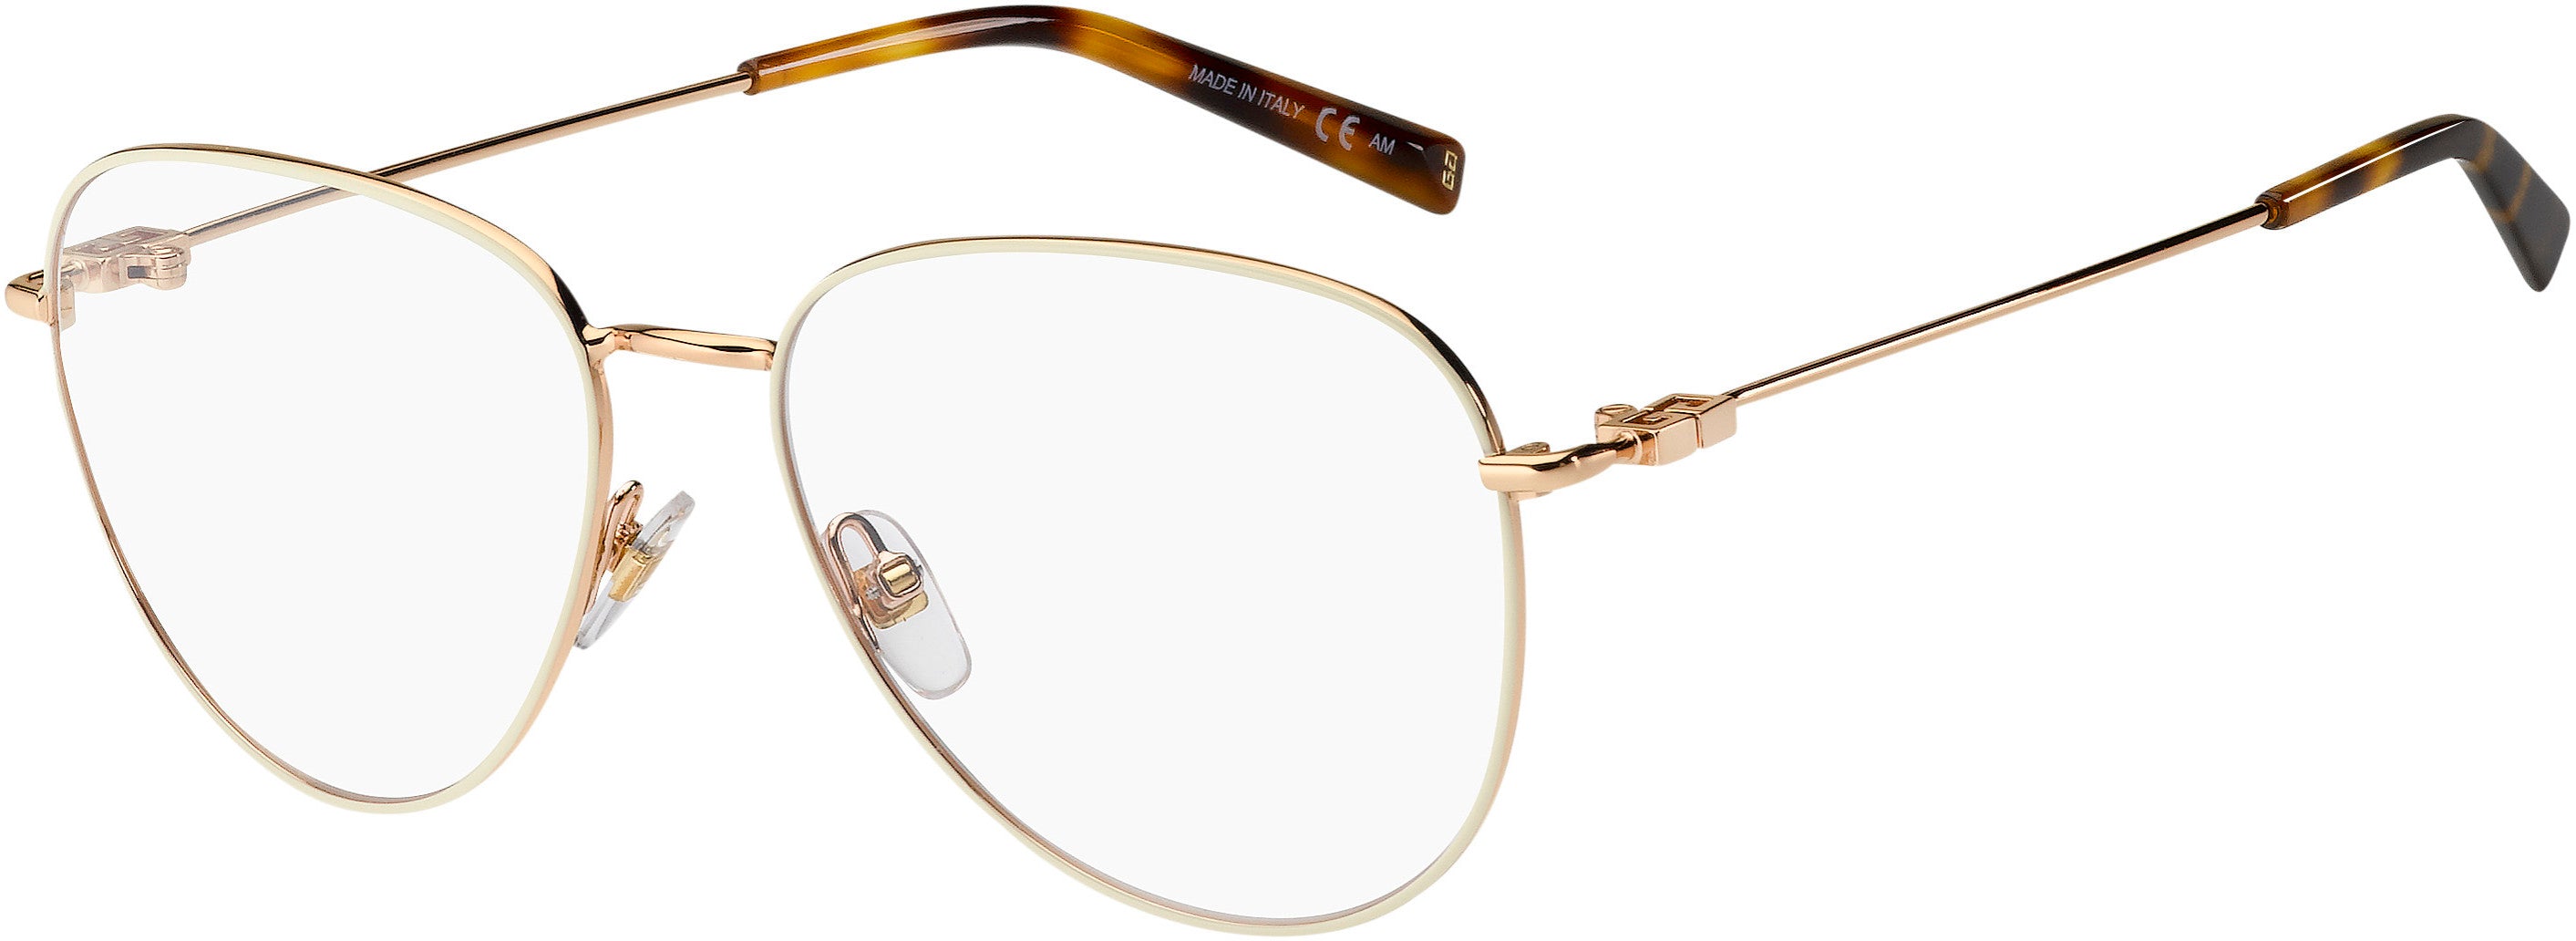  Givenchy 0150 Oval Modified Eyeglasses 0Y3R-0Y3R  Gold Ivory (00 Demo Lens)